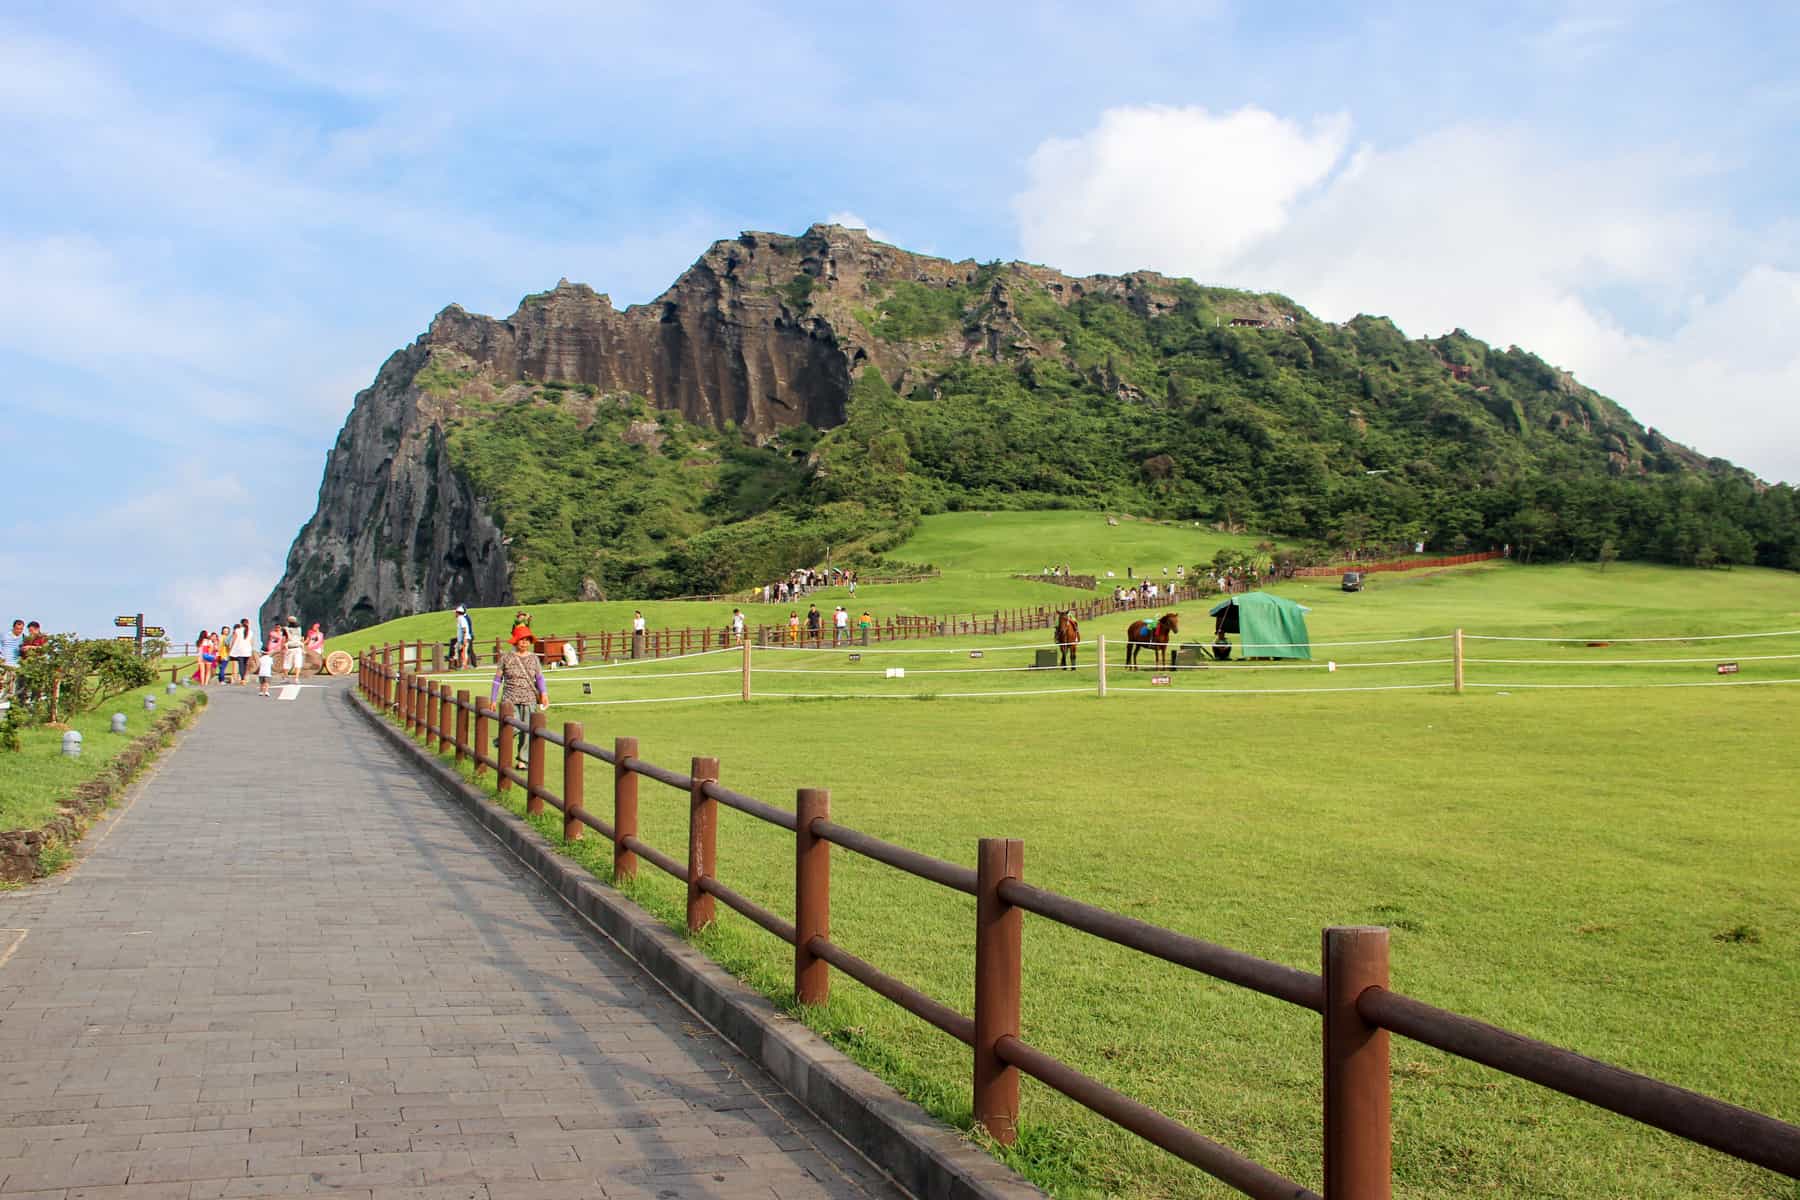 View looking towards a long path with red rails that leads to the green and brown volcanic mound of Seongsan ilchulbong in Jeju Island